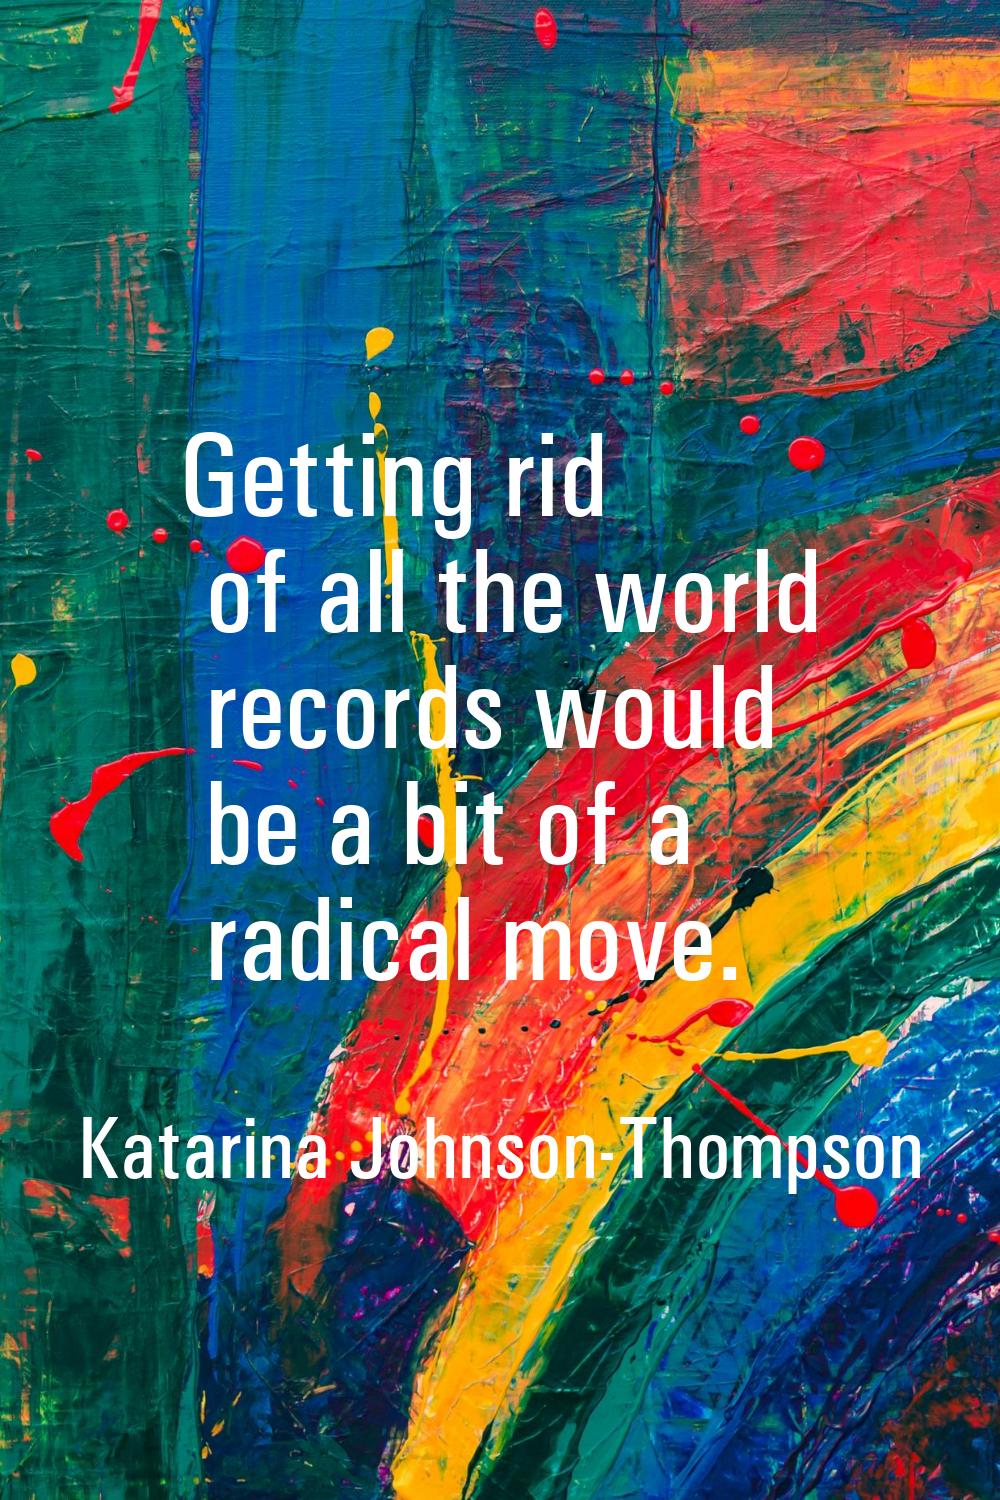 Getting rid of all the world records would be a bit of a radical move.